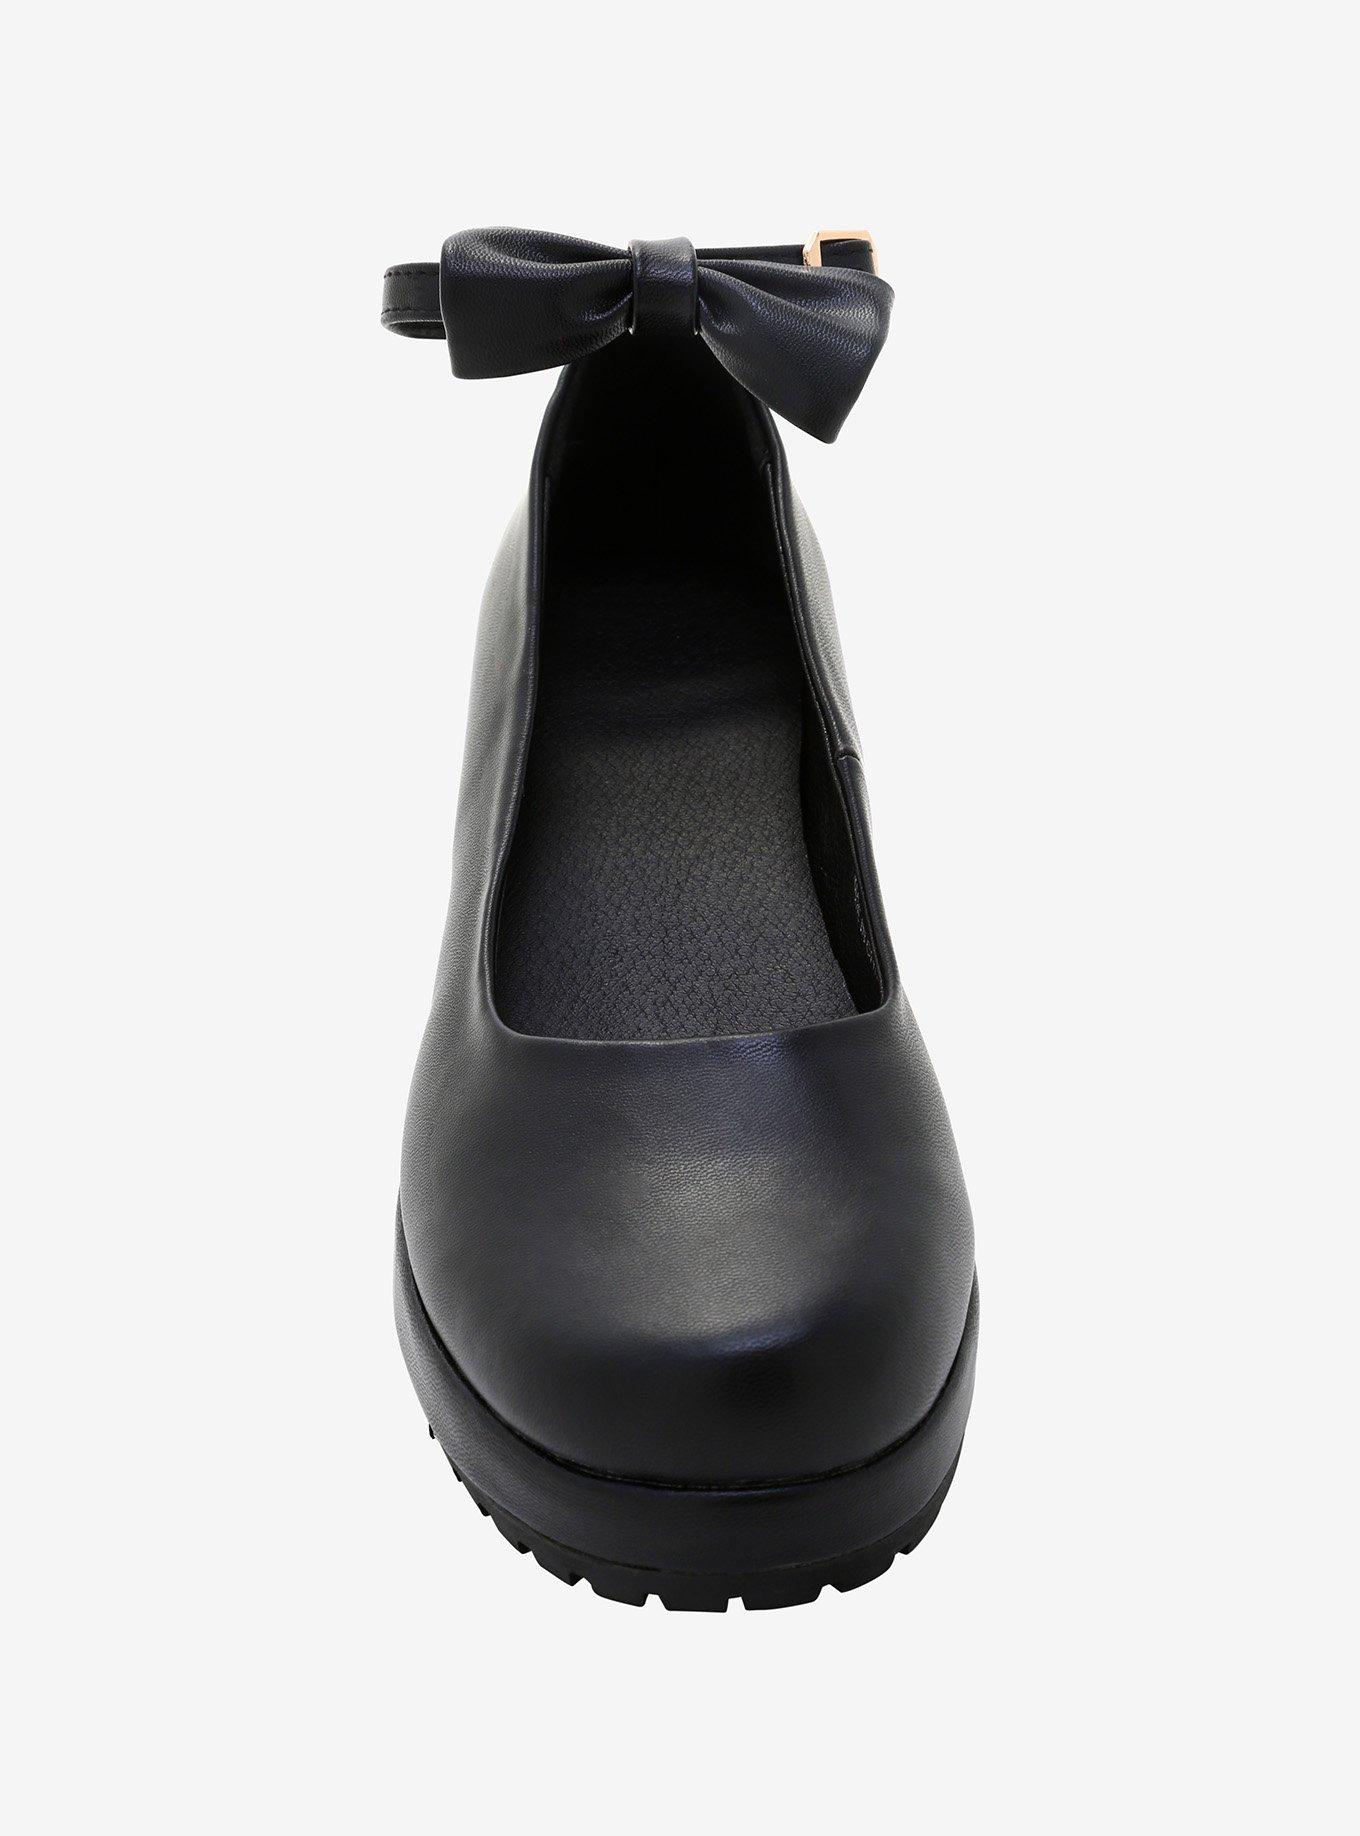 Ankle Strap & Bow Heeled Mary Janes, BLACK, alternate